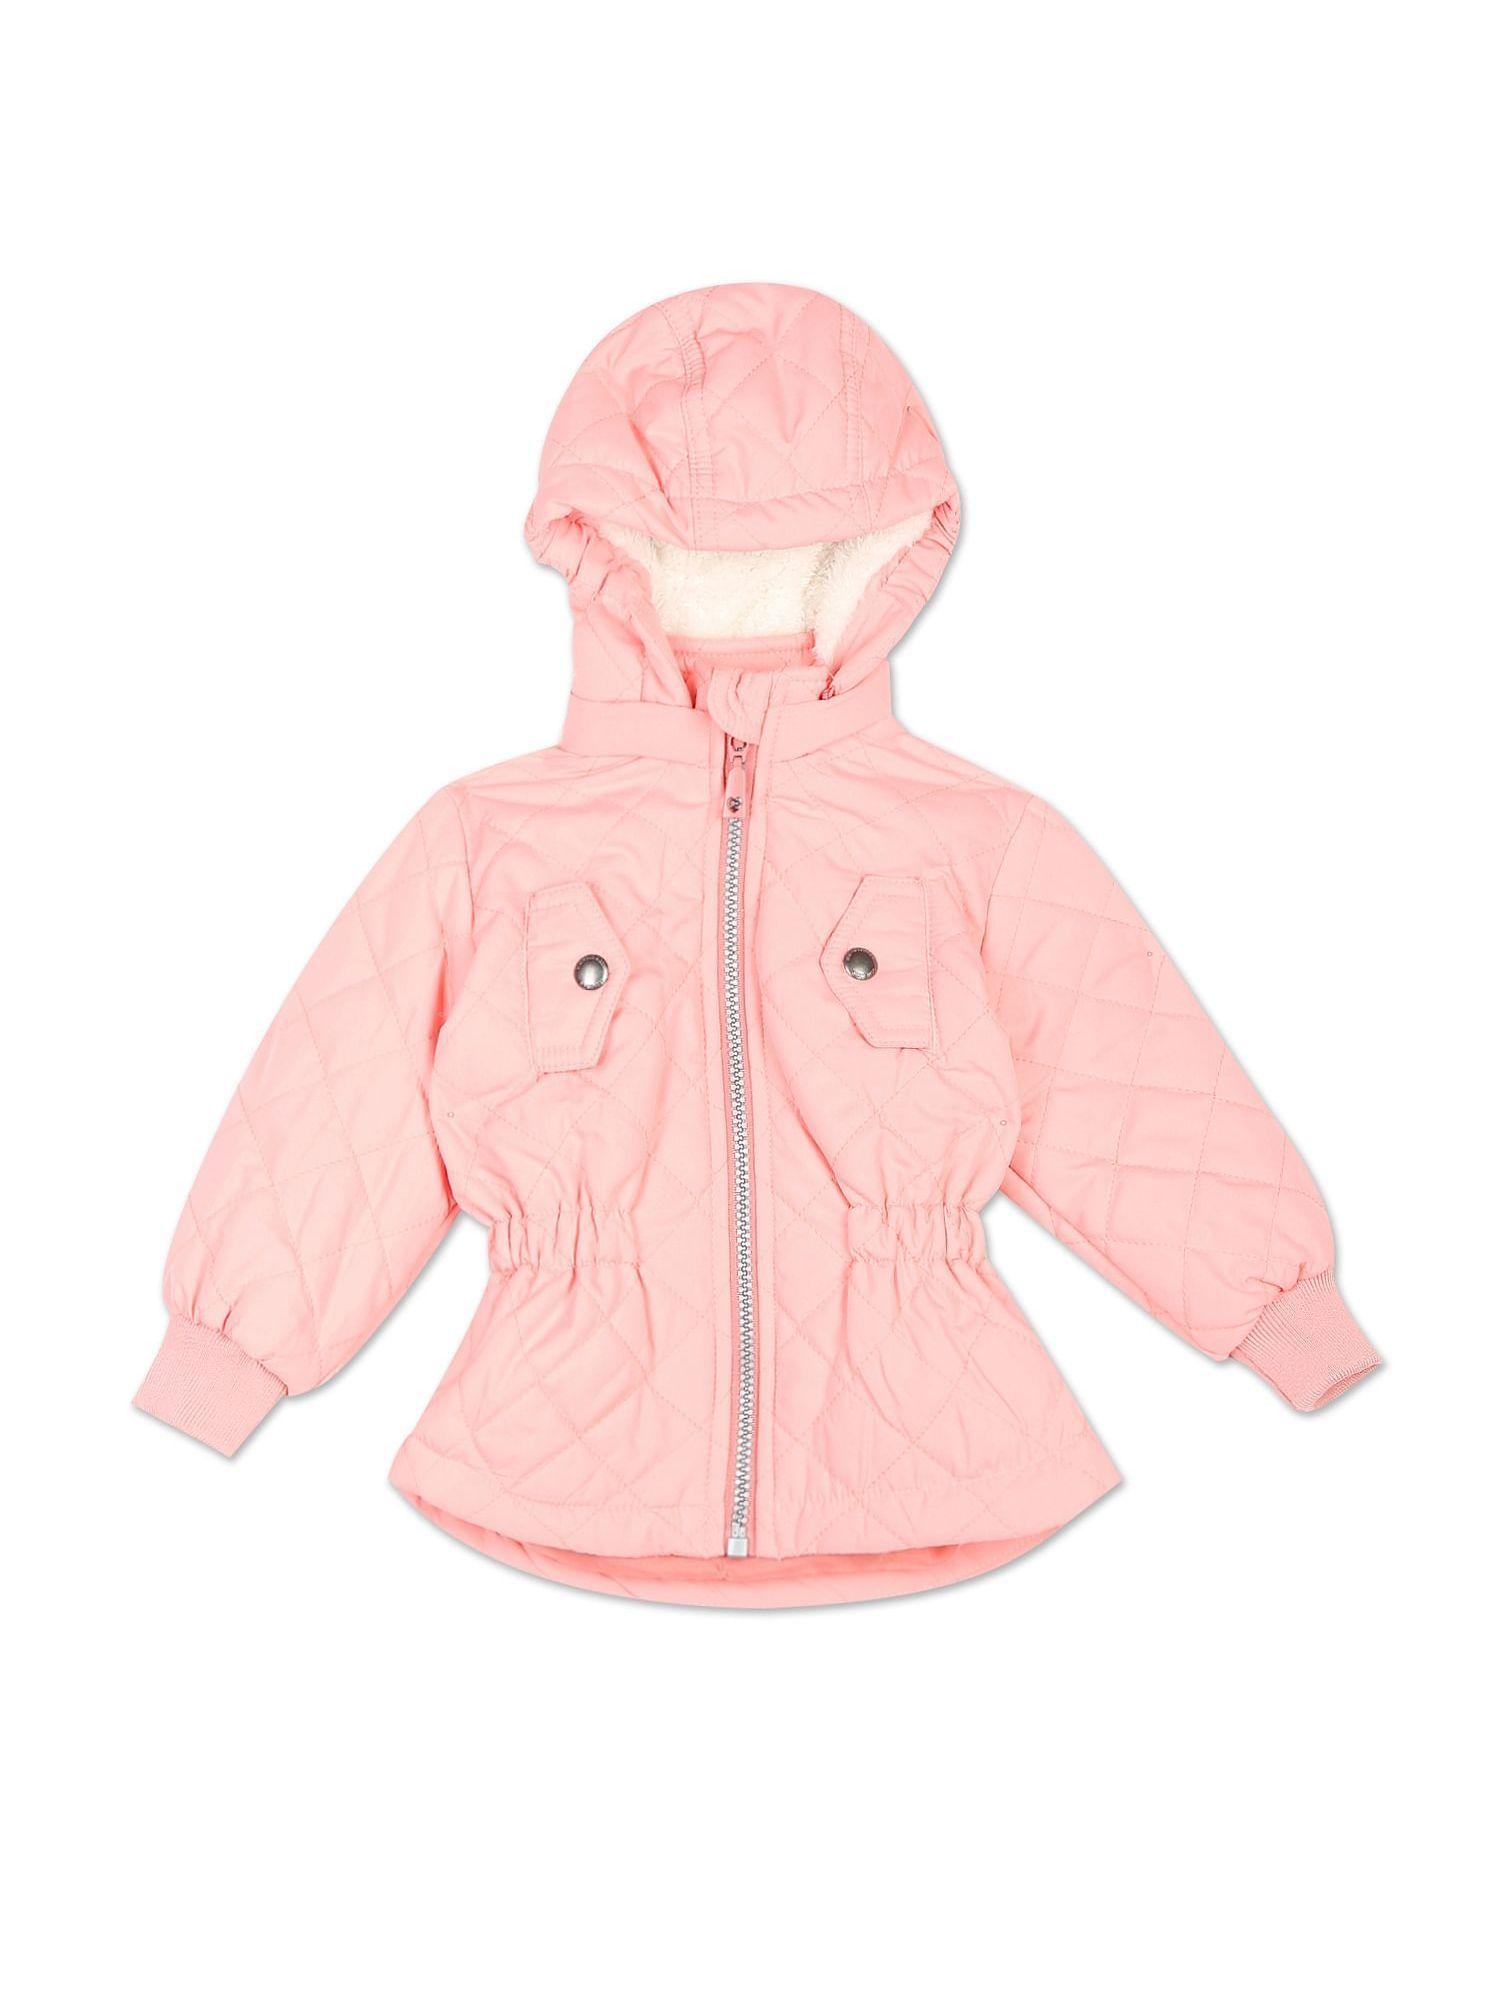 Girls Light Pink Hooded Quilted Jacket